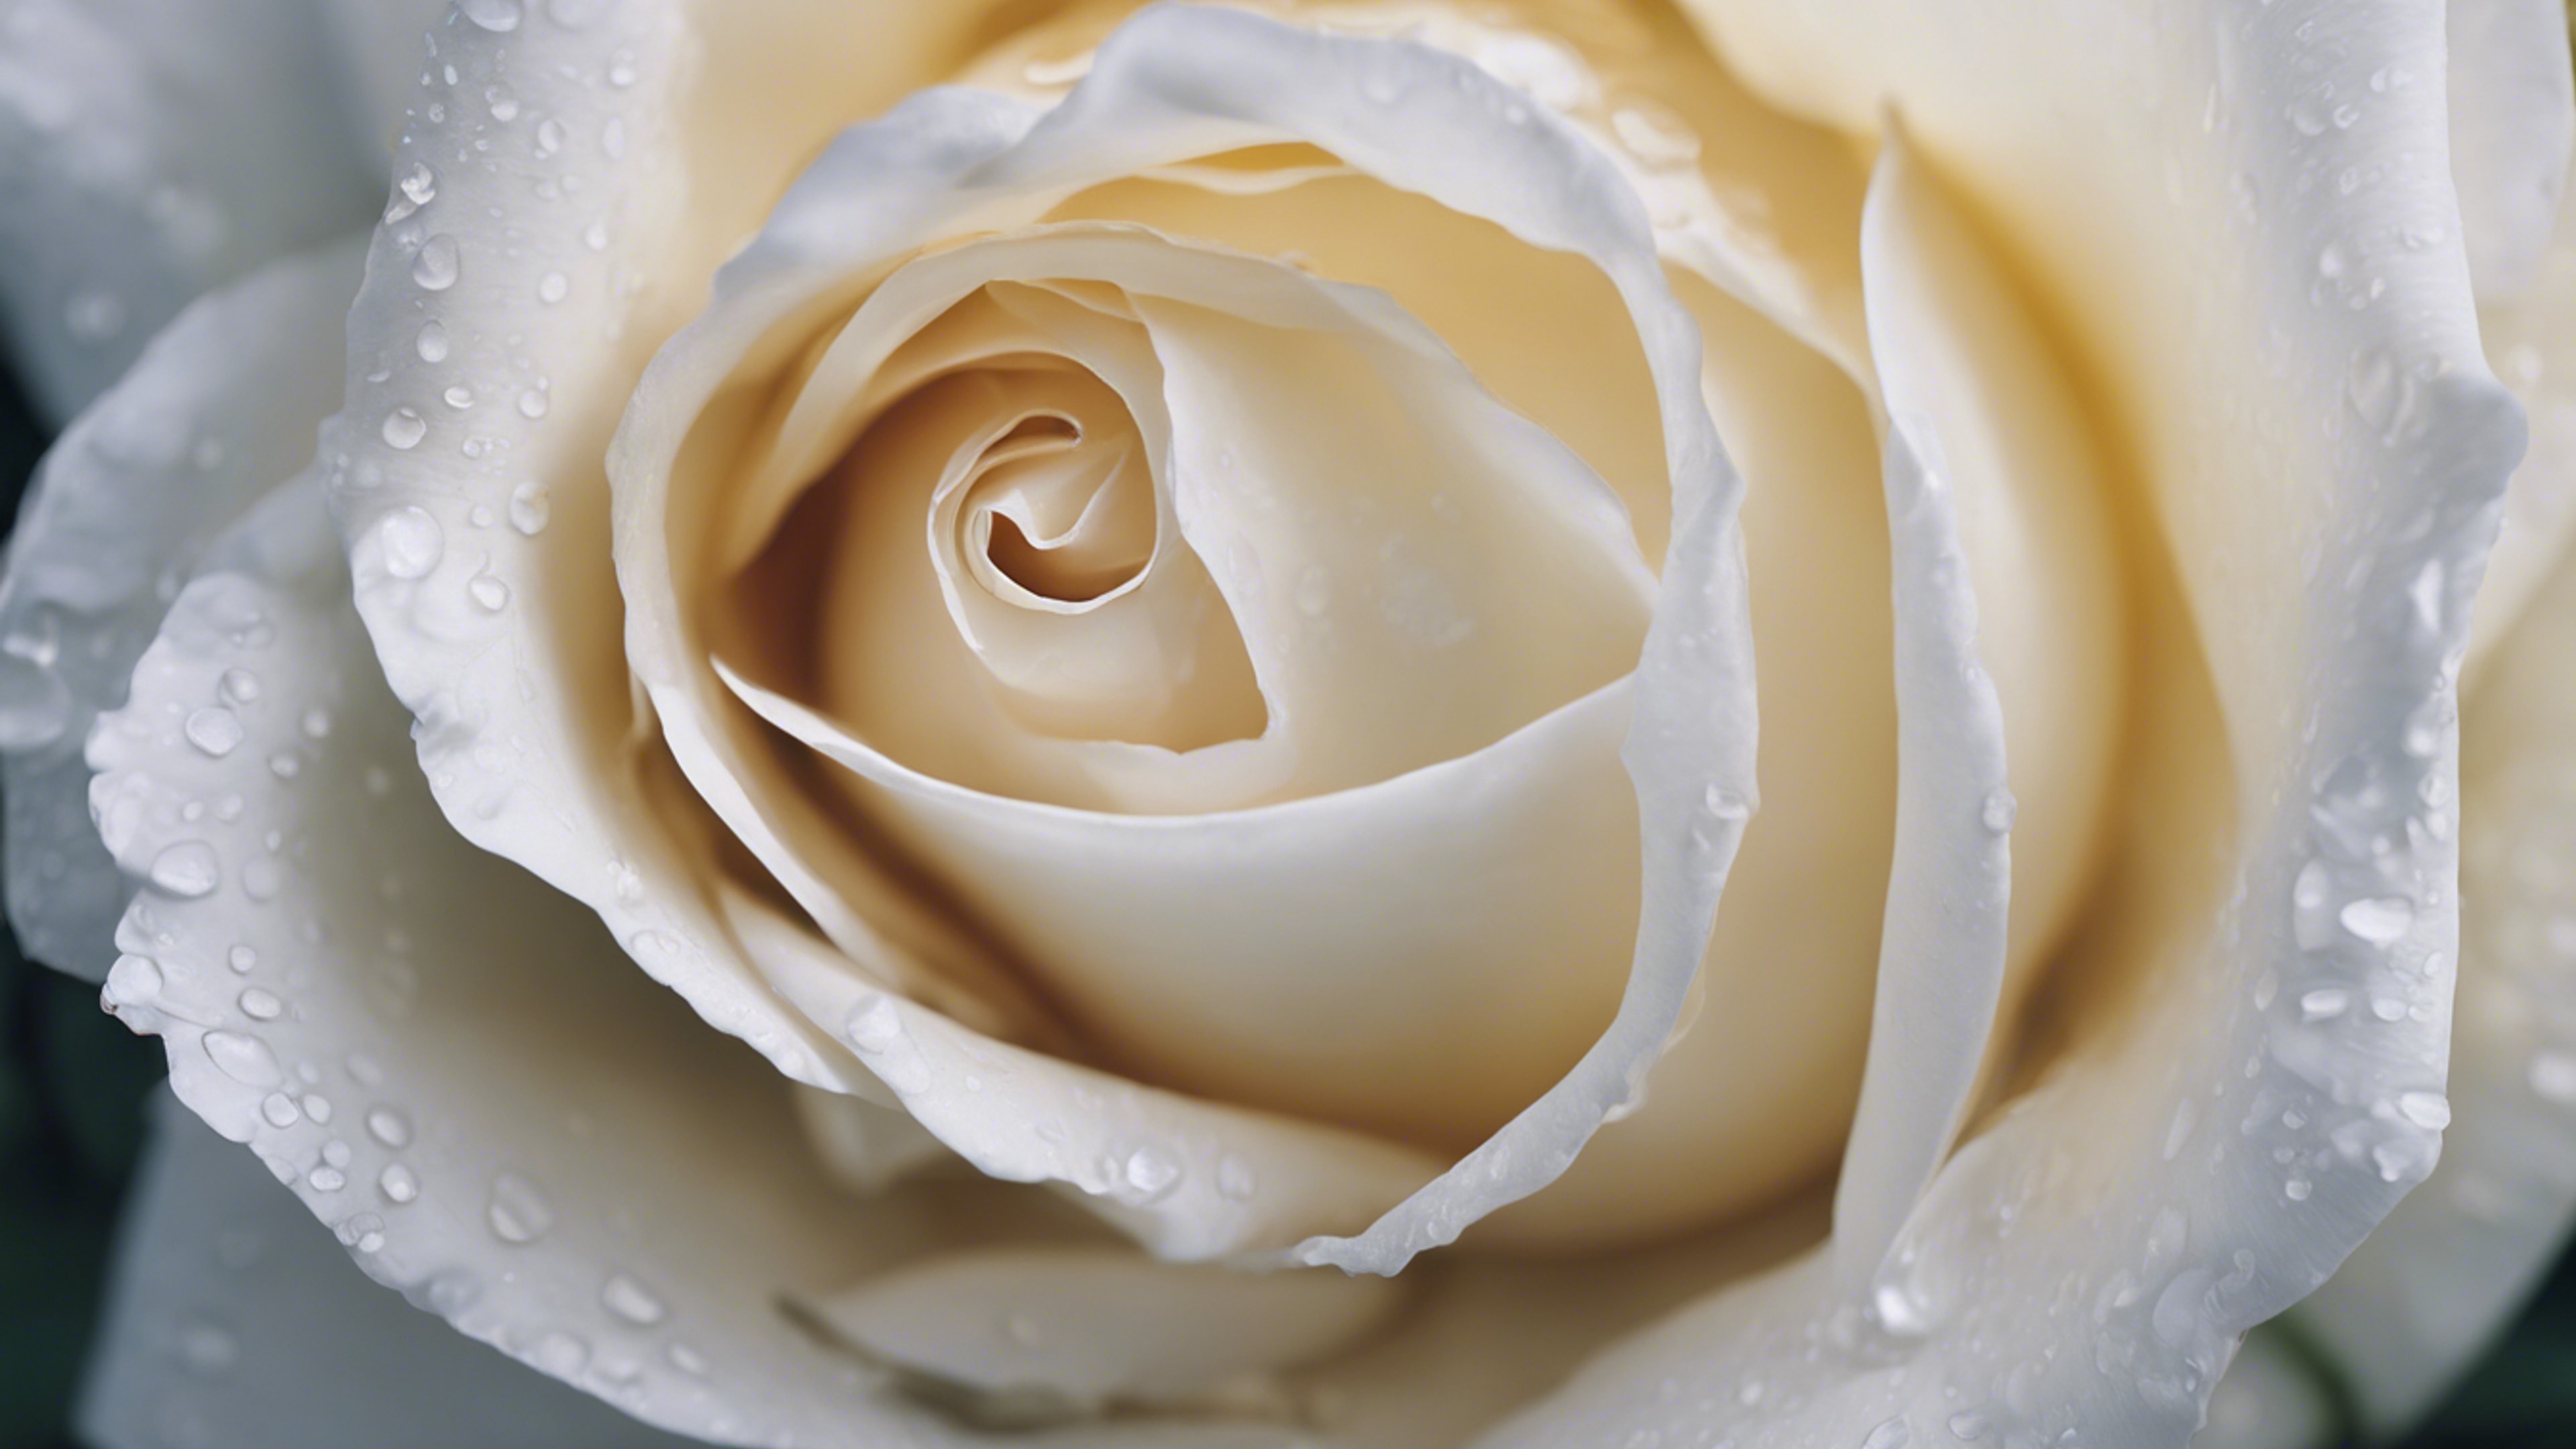 Zoomed view of the velvety petals of a white rose. Wallpaper[9ebd1bf4e1a74c36ba13]